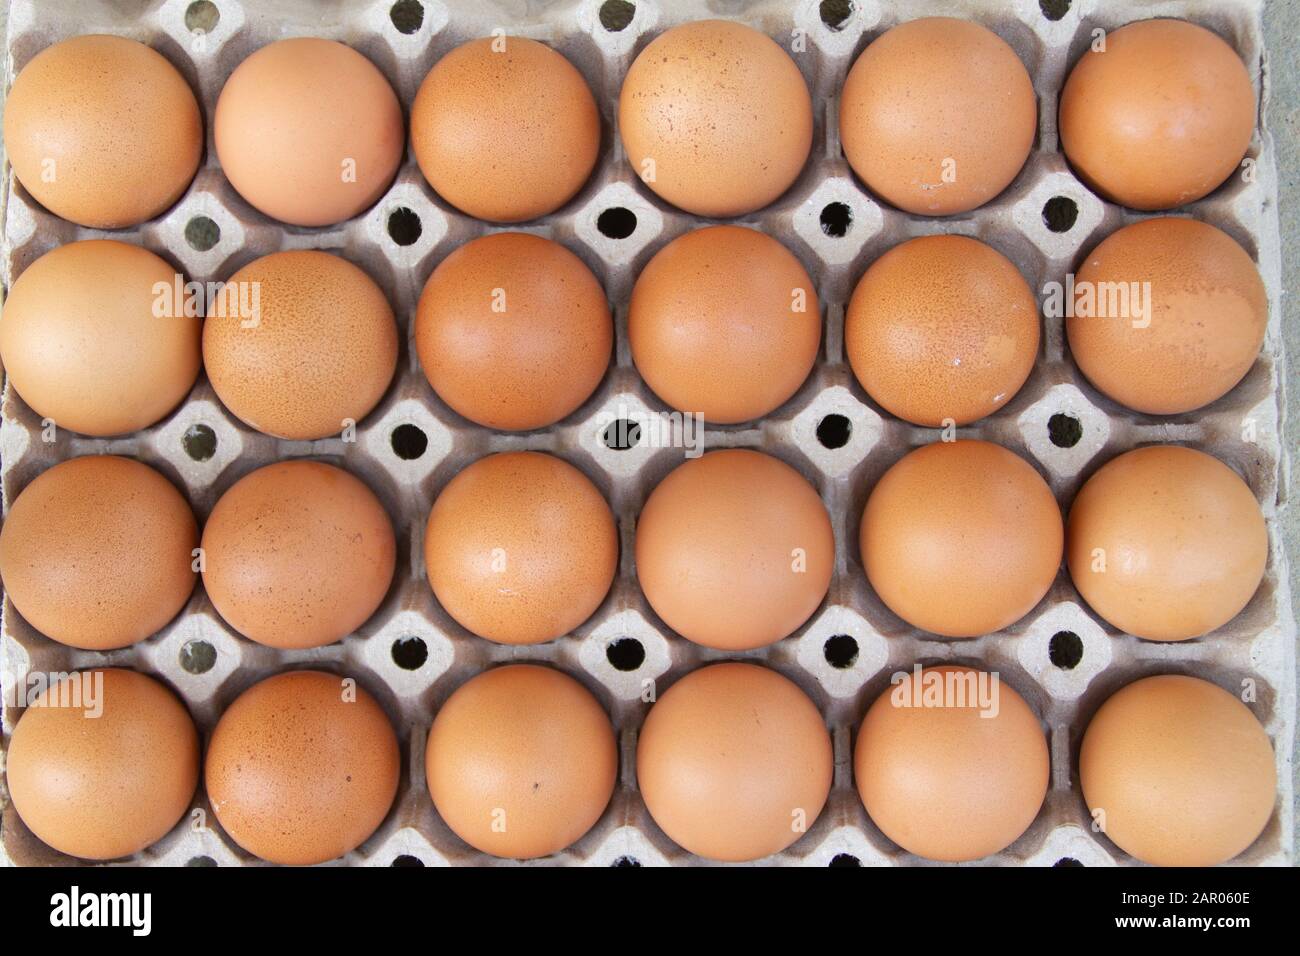 Fresh rural brown eggs packed into a cardboard container Stock Photo